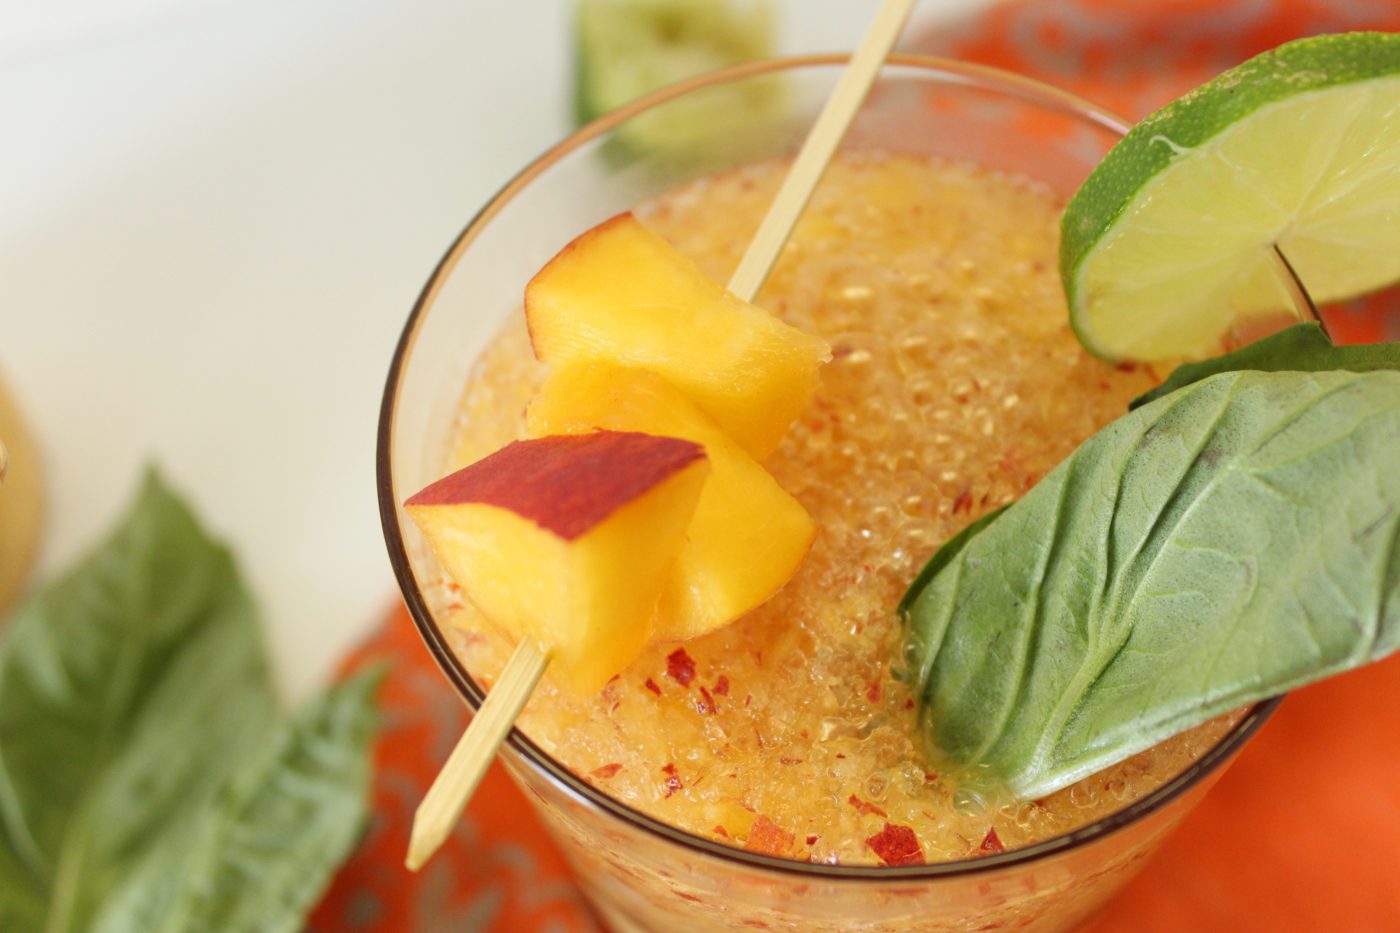 There's nothing better than freesh peaches in the summer. Adding them to cocktails is even better.